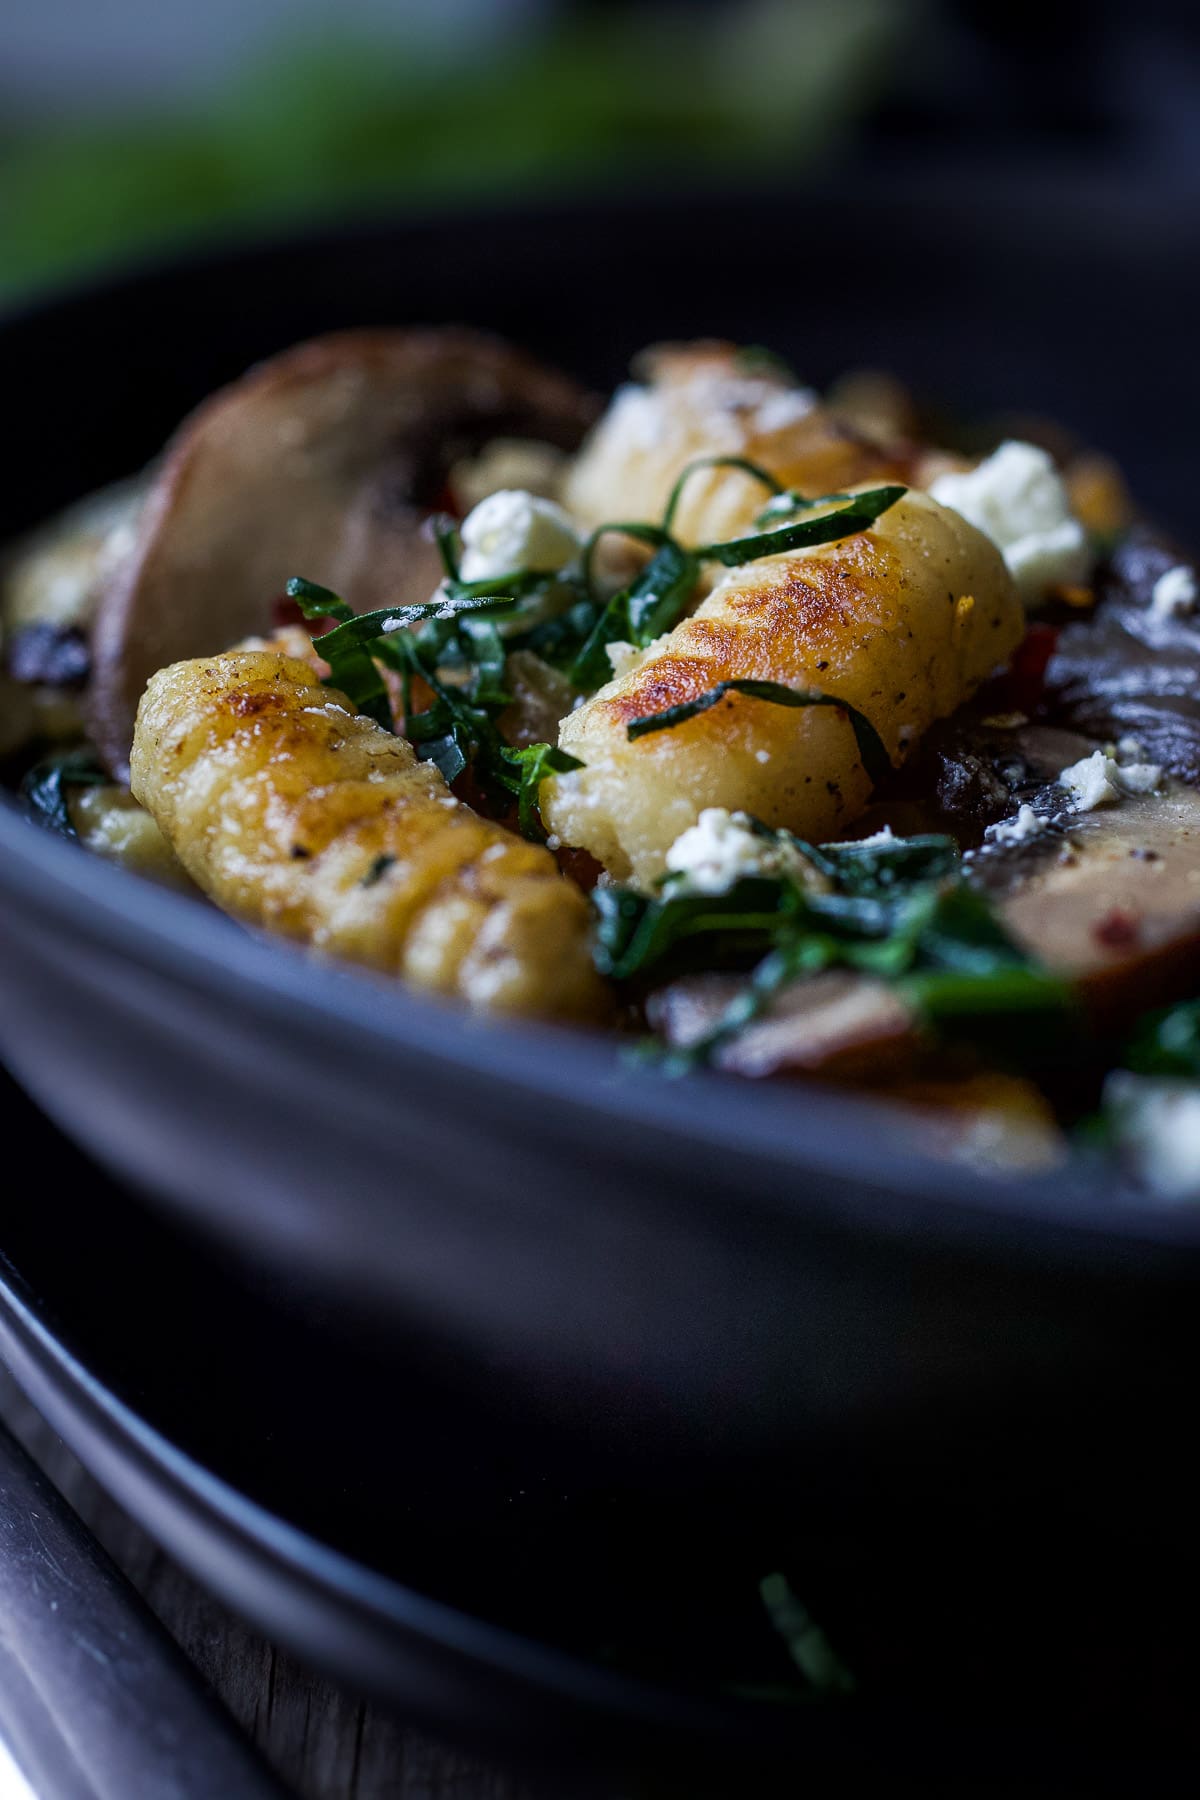 Caramelized fennel, sautéed mushrooms and wilted spinach combine perfectly with pan-seared potato gnocchi, a quick vegetarian dinner!